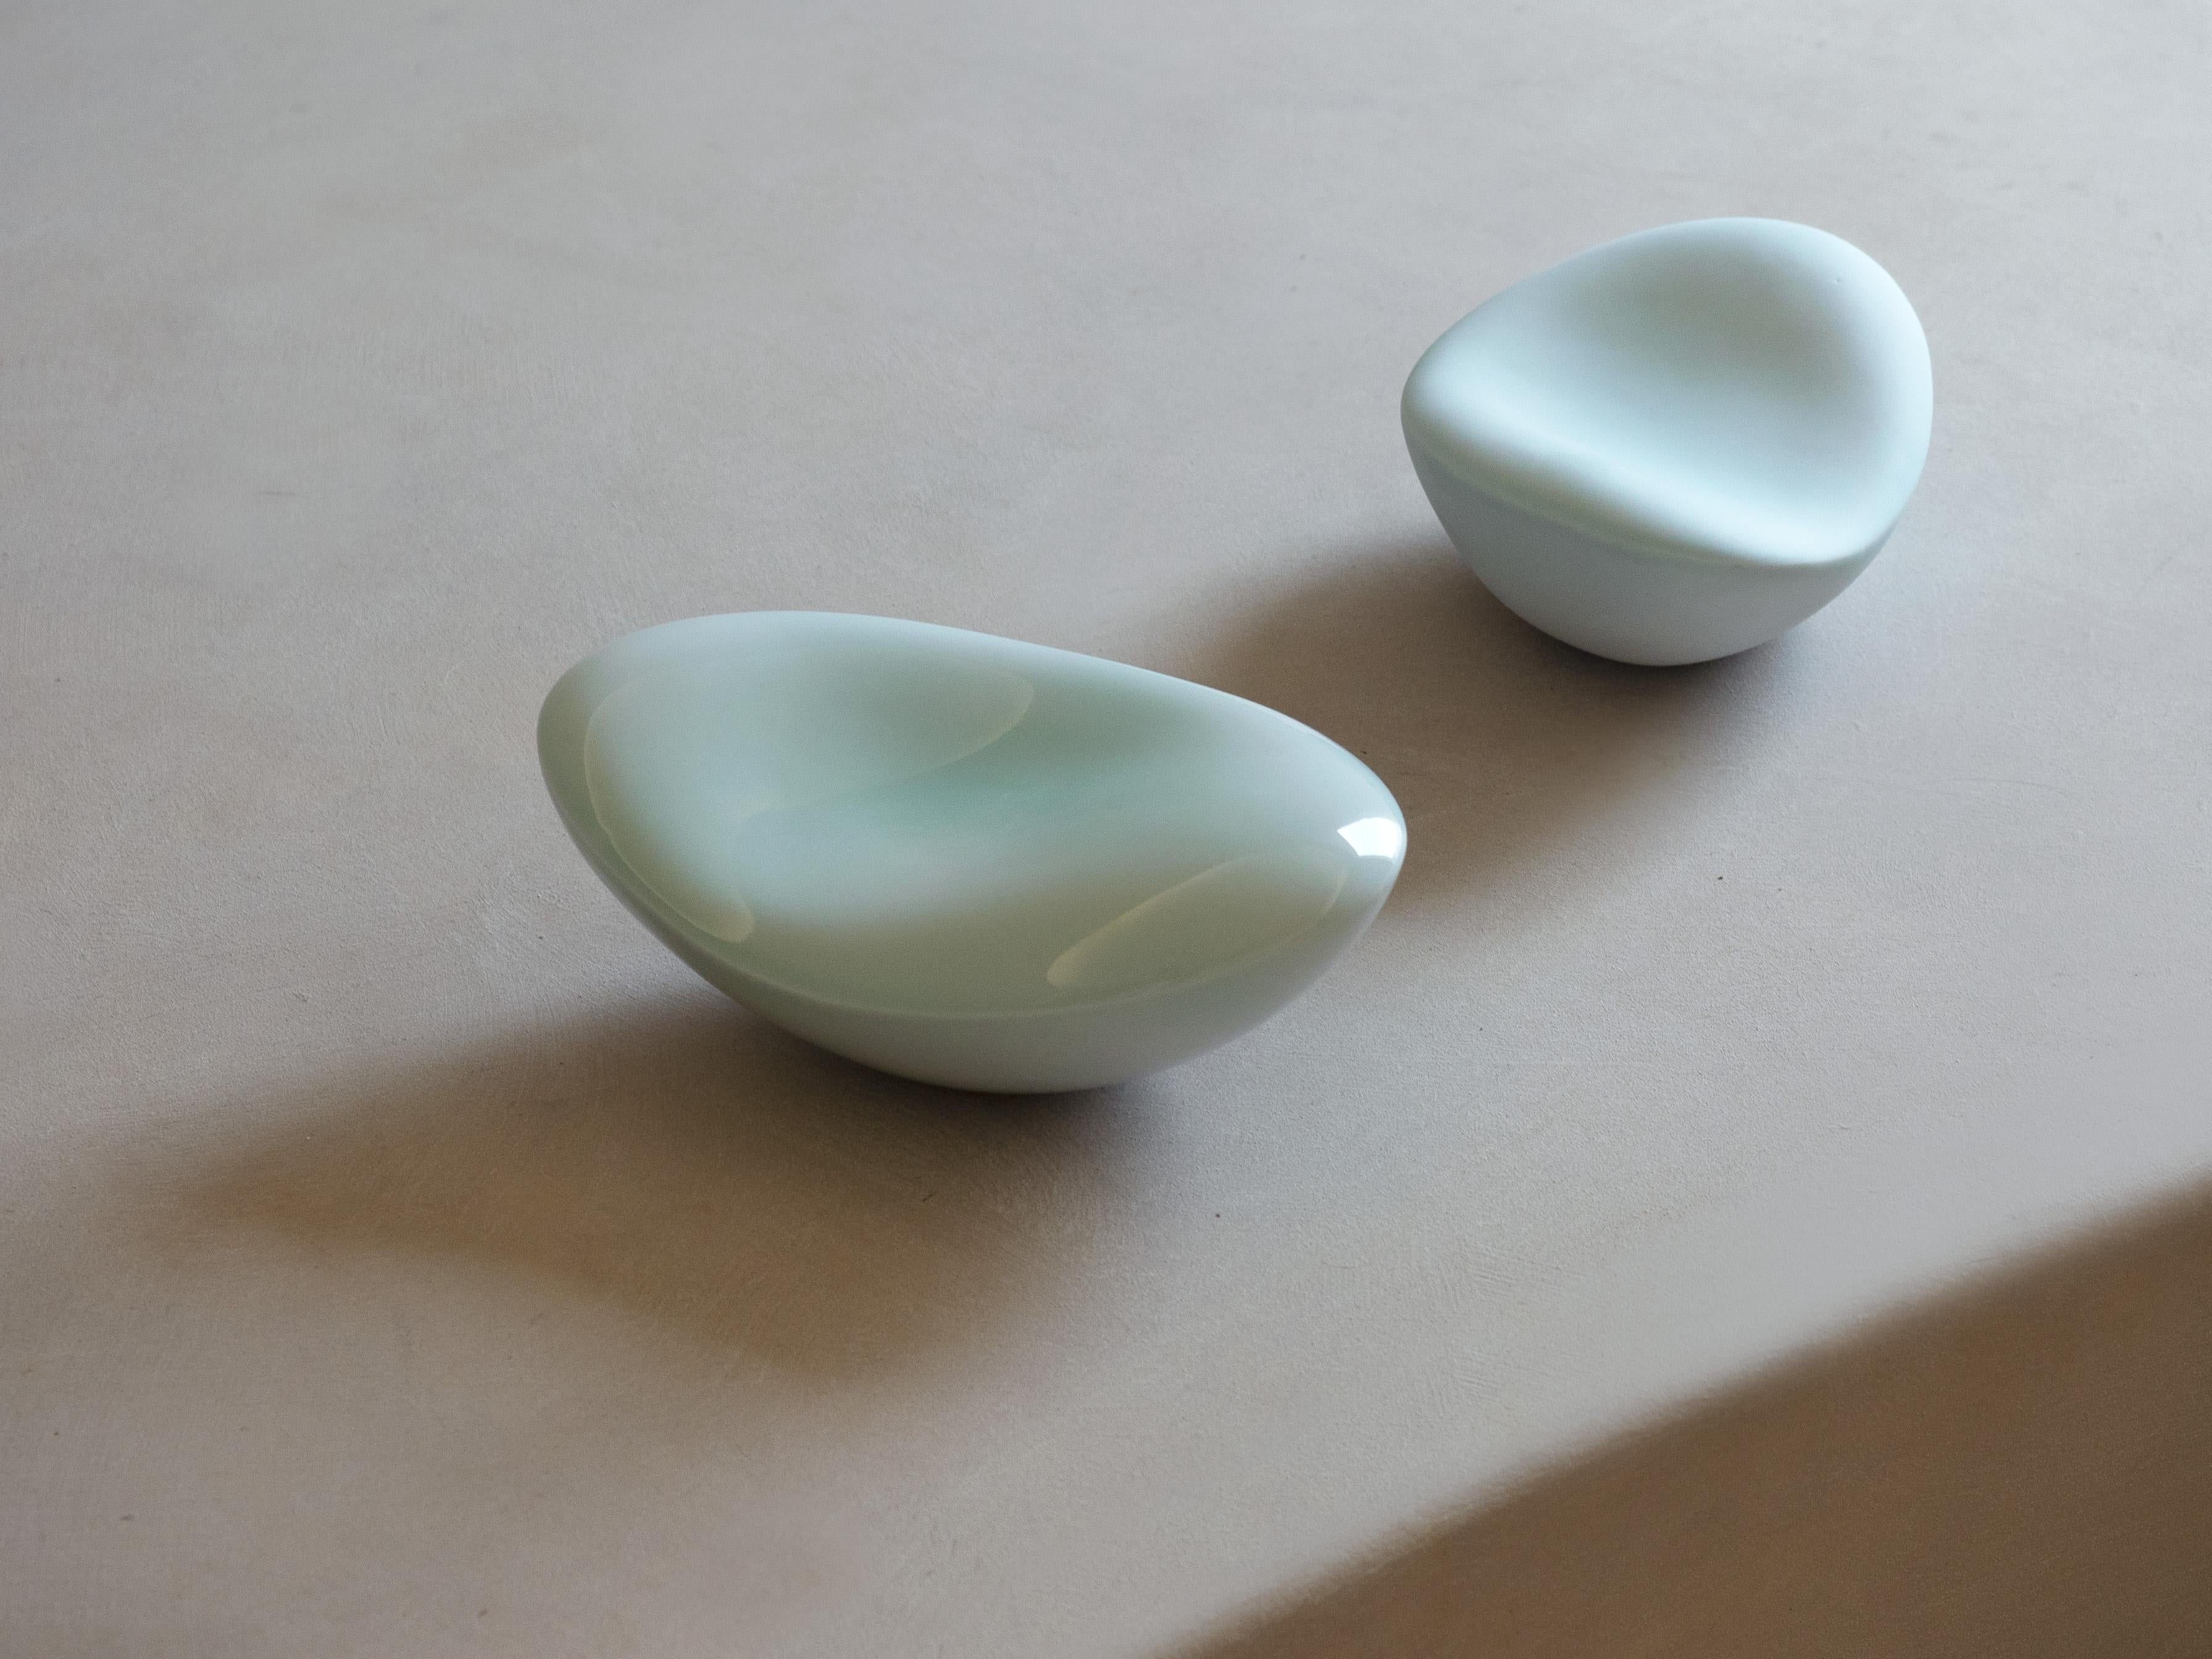 Bean by Soo Joo is a unique abstract table sculpture, created in porcelain ceramic and Korean celadon glaze. These biophilic ceramic sculptures by Soo Joo has a timeless beauty that is not affected by changing trends, and can be enjoyed for decades.